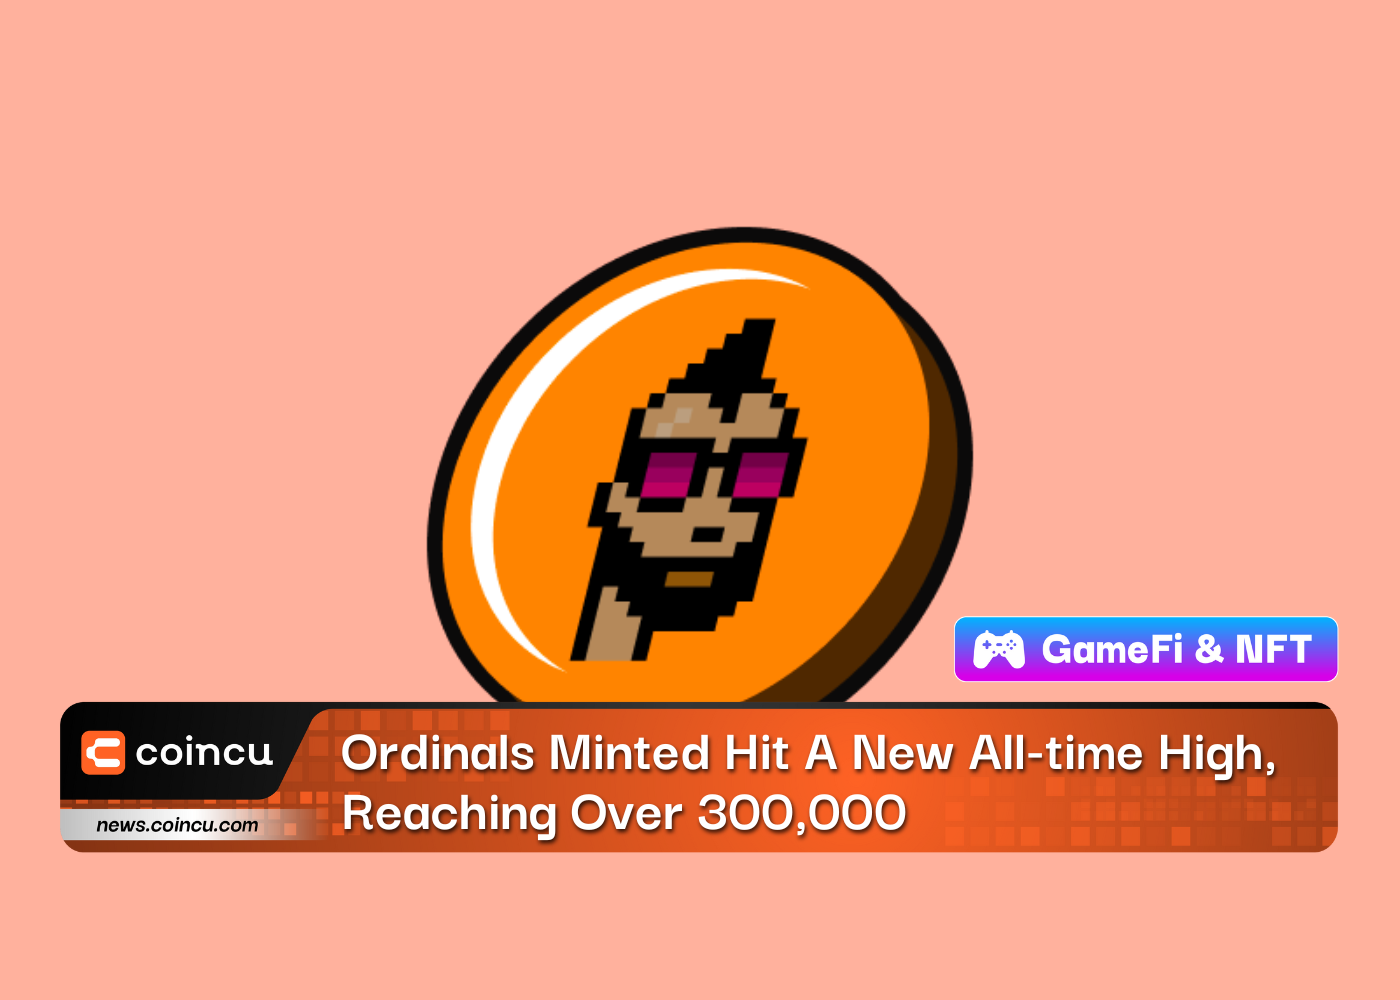 Ordinals Minted Hit A New All-time High, Reaching Over 300,000